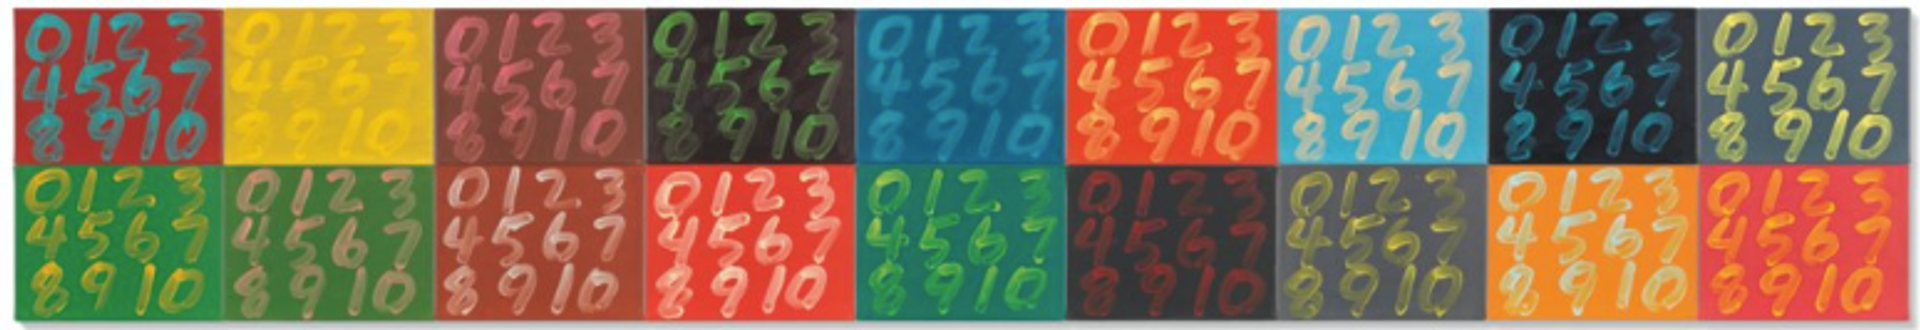 A large-scale canvas consisting of 18 square panels, each panel featuring a different color. The numbers 0 through 10 are displayed on each panel, with each number colored in a unique shade.